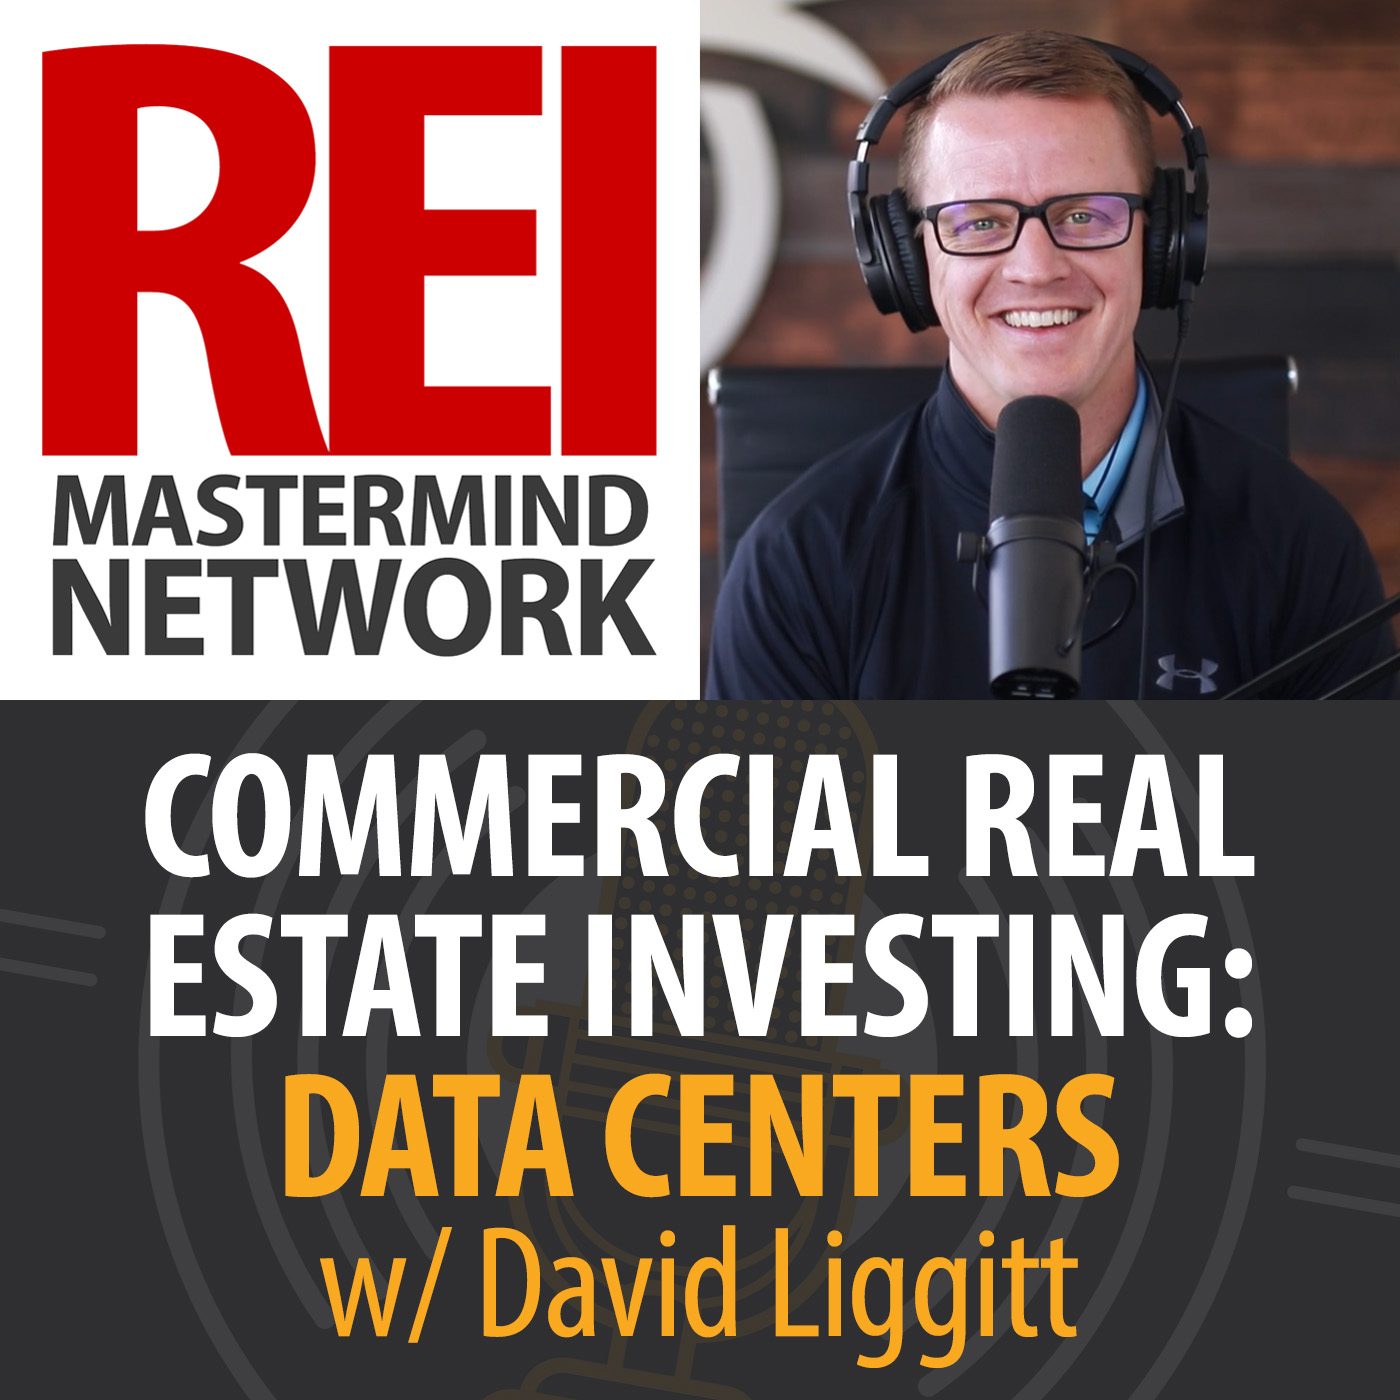 Commercial Real Estate Investing: Data Centers with David Liggitt